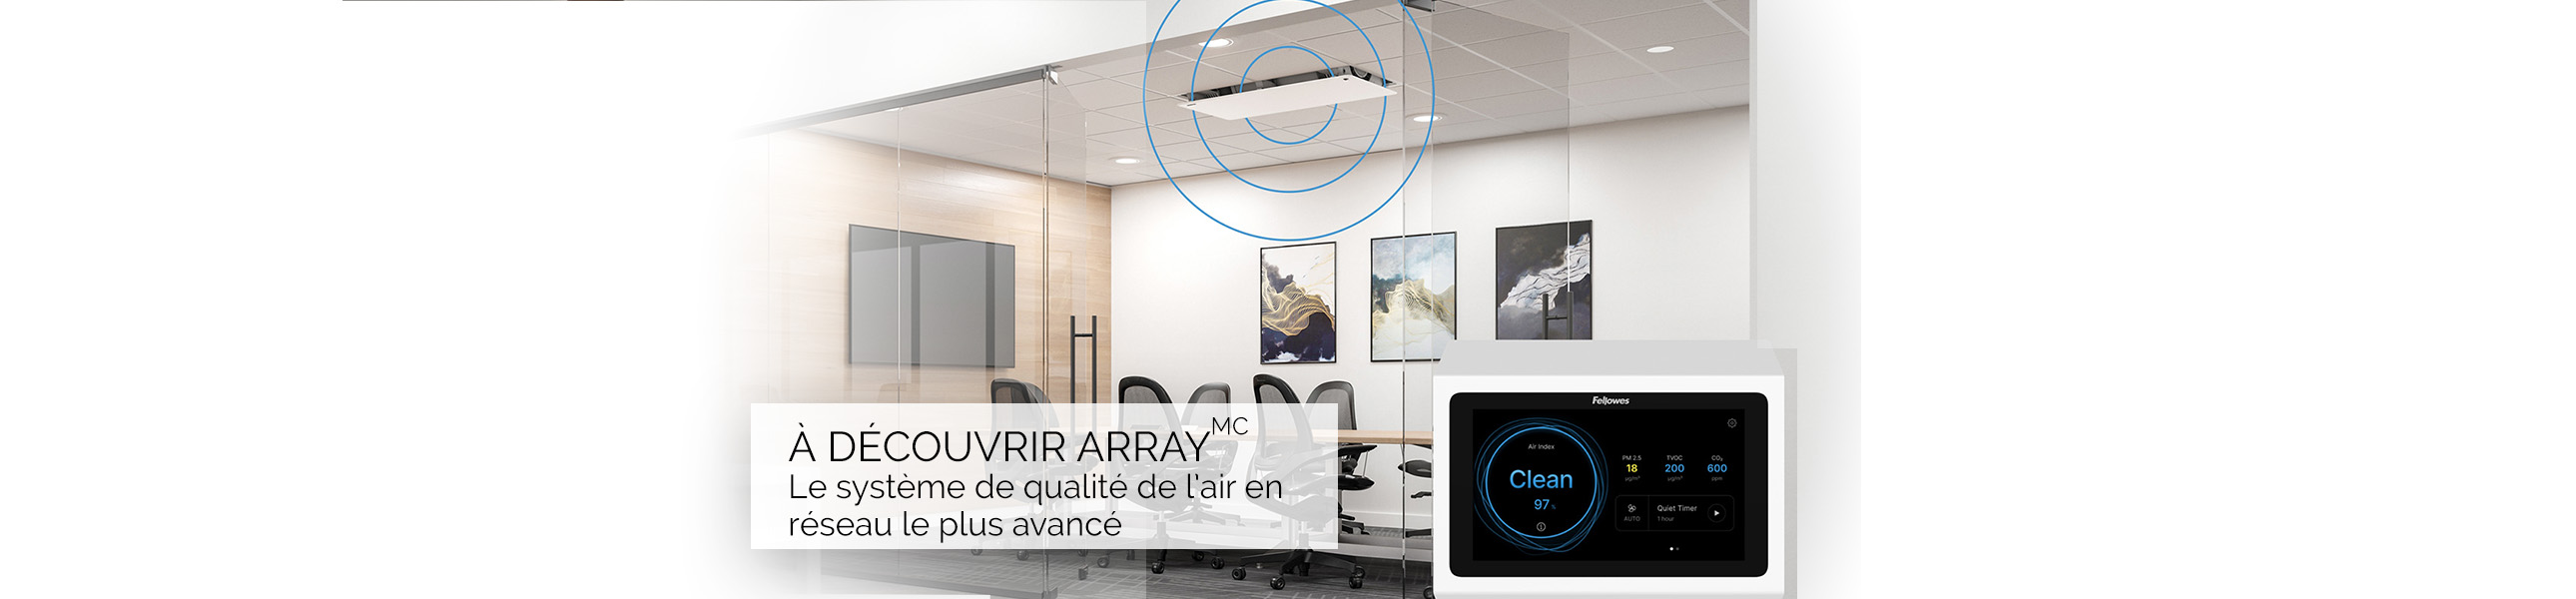 Introducing Array - The Most Advanced Networked Air Quality System